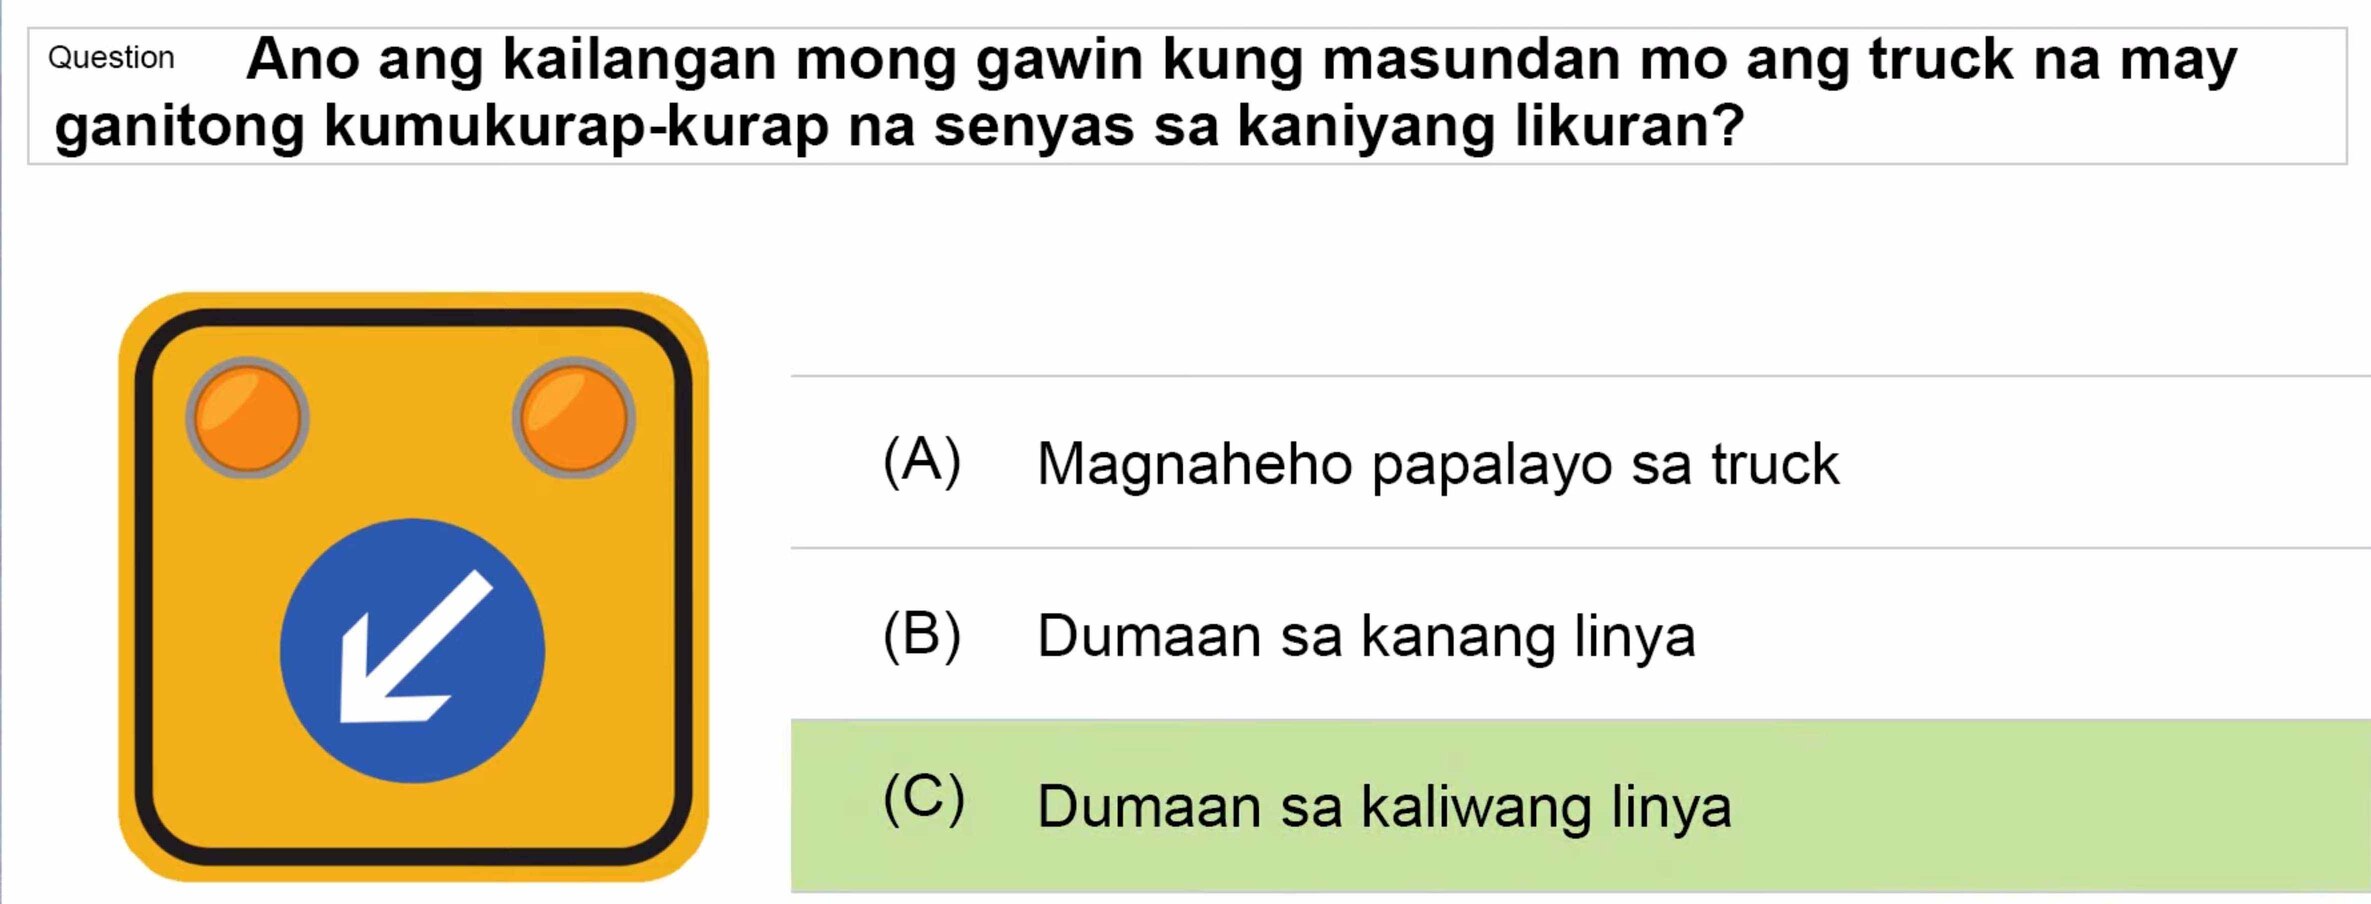 LTO Tagalog non professional exam reviewer motorcycle 1 (39)